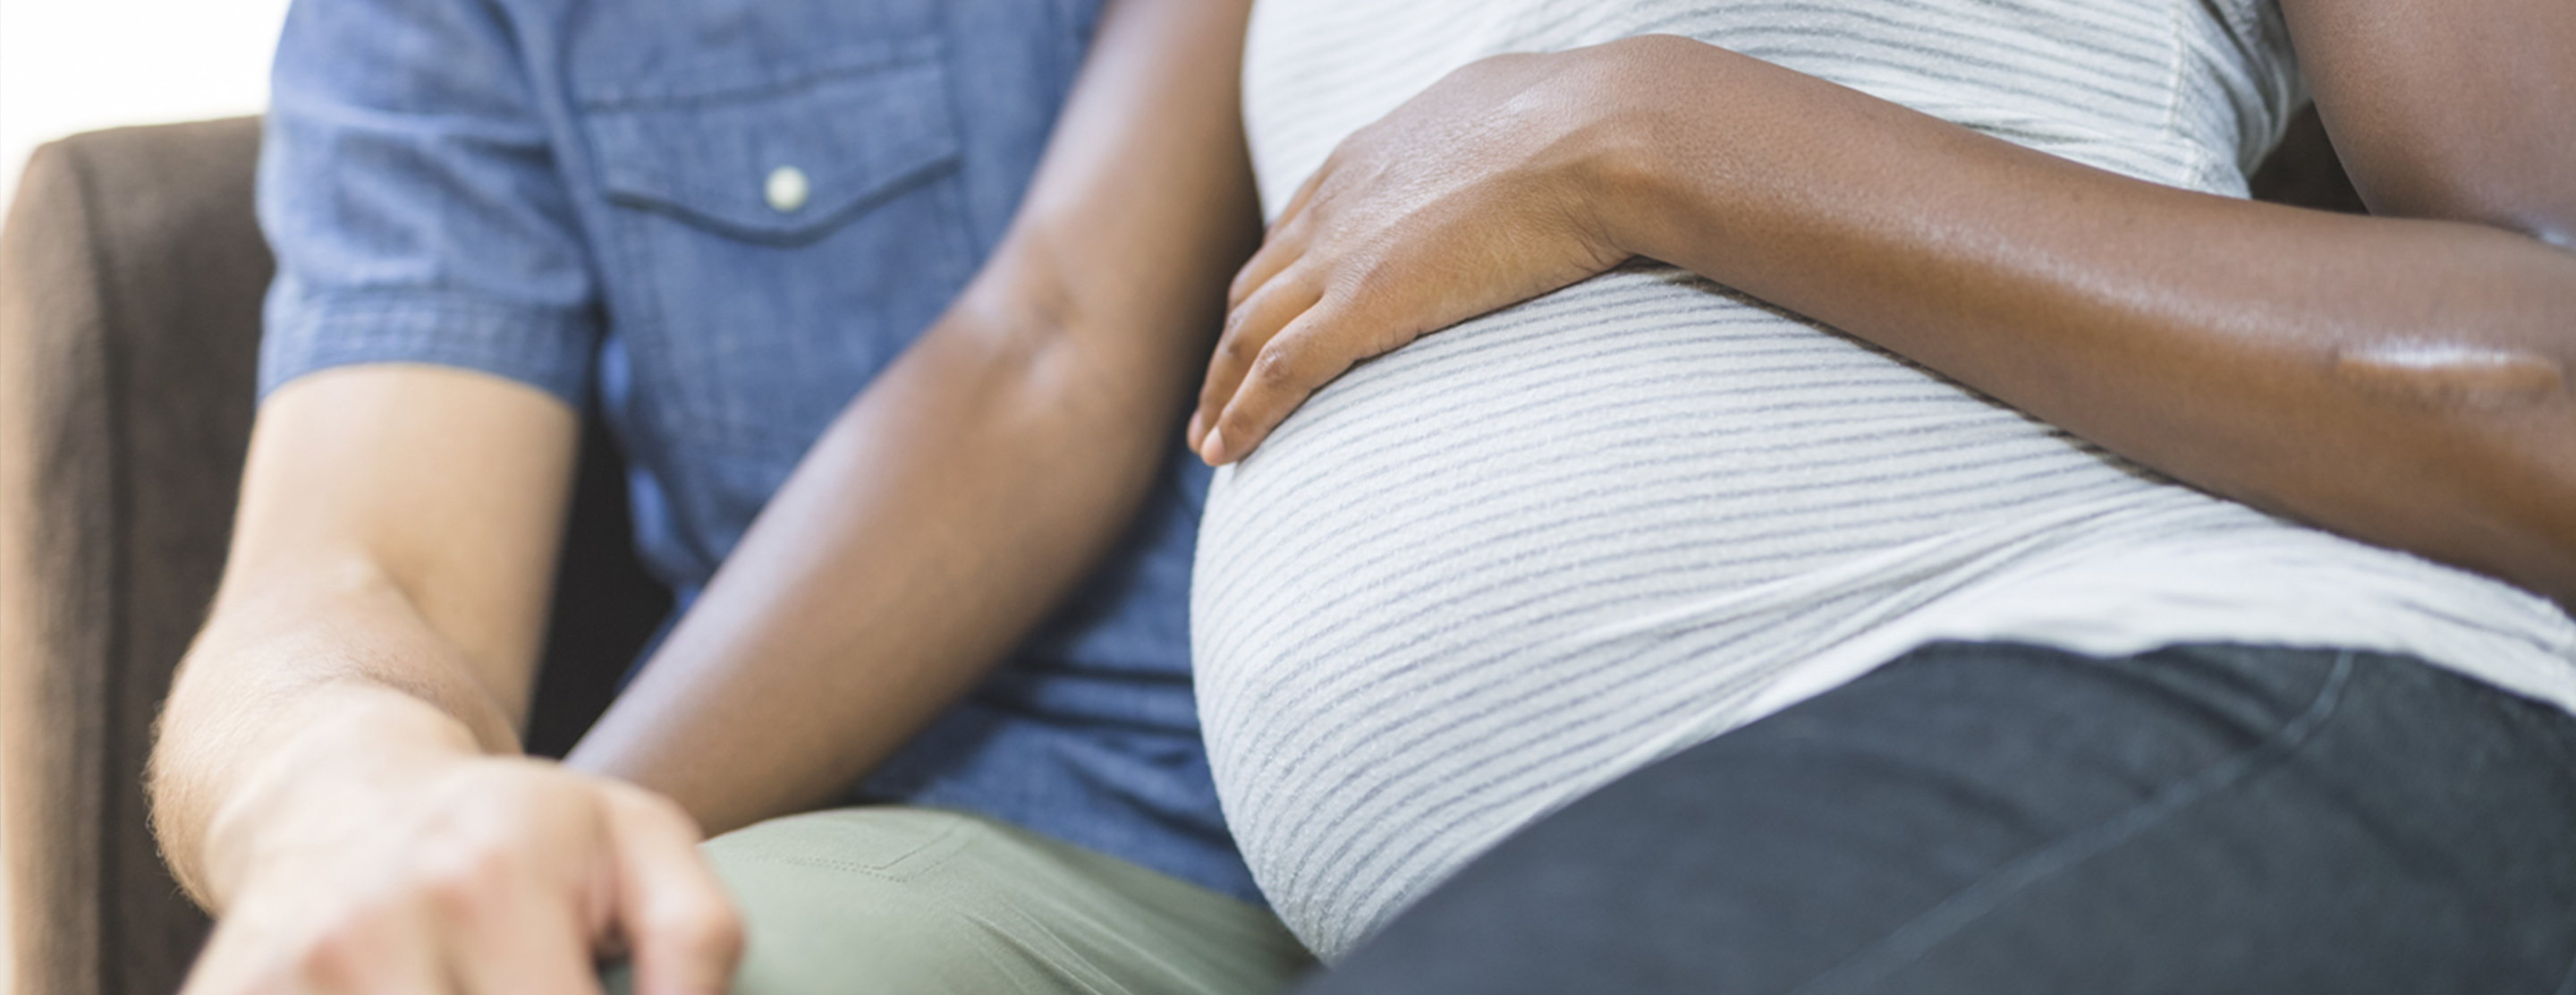 Sex During Pregnancy | Patient Education | UCSF Health